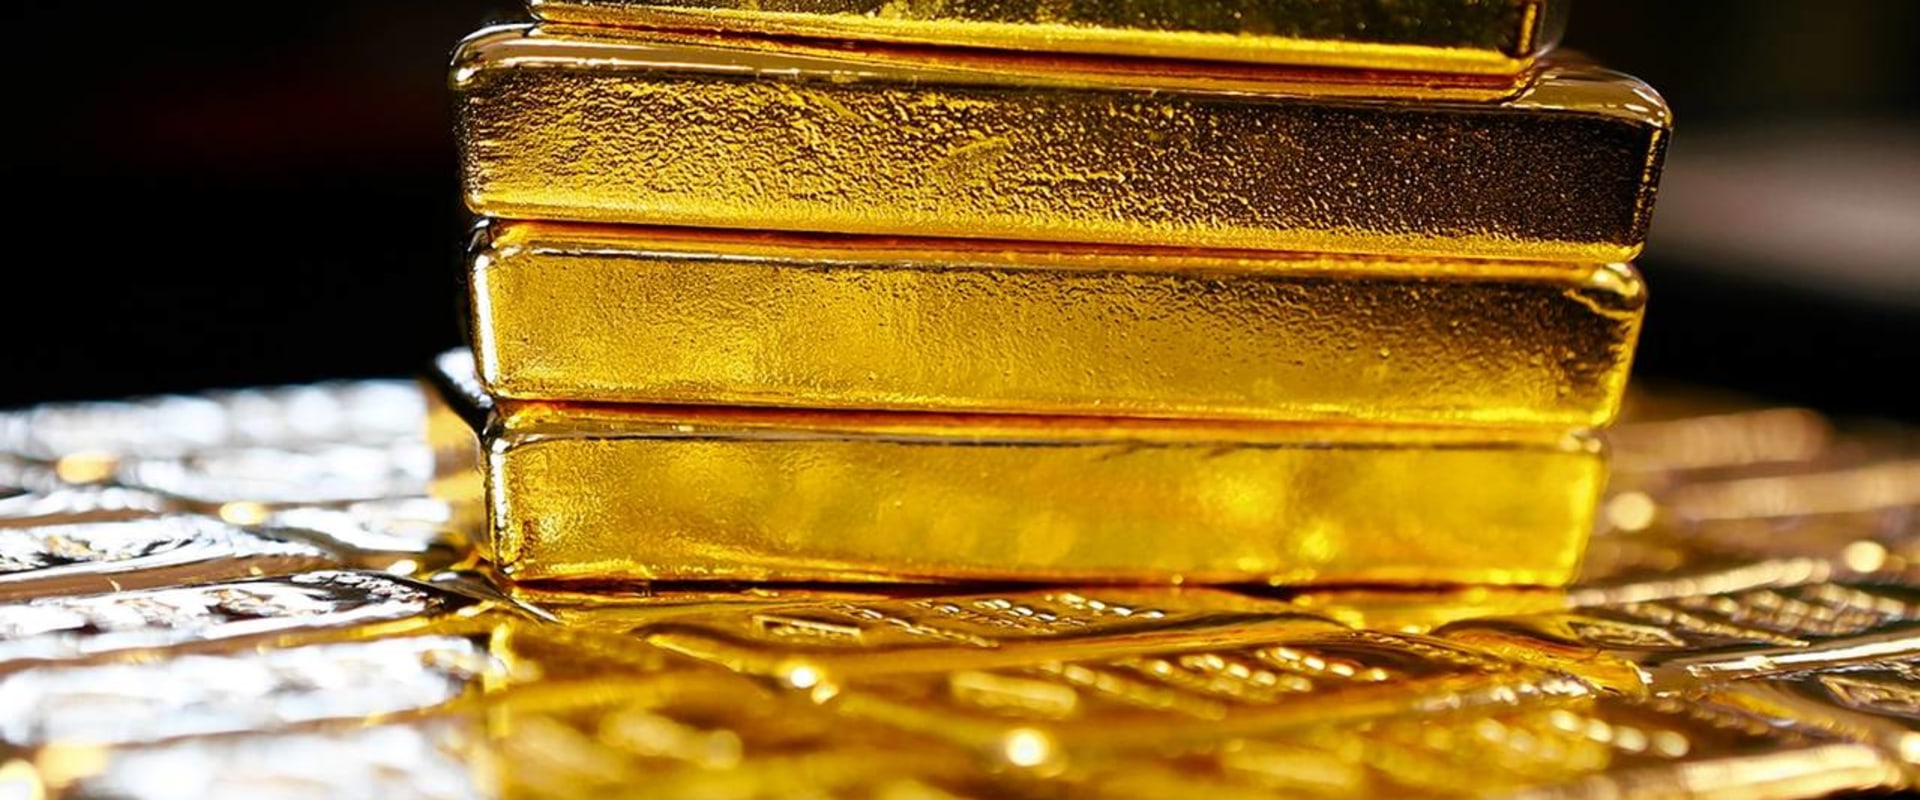 Can i buy gold at fidelity roth ira?